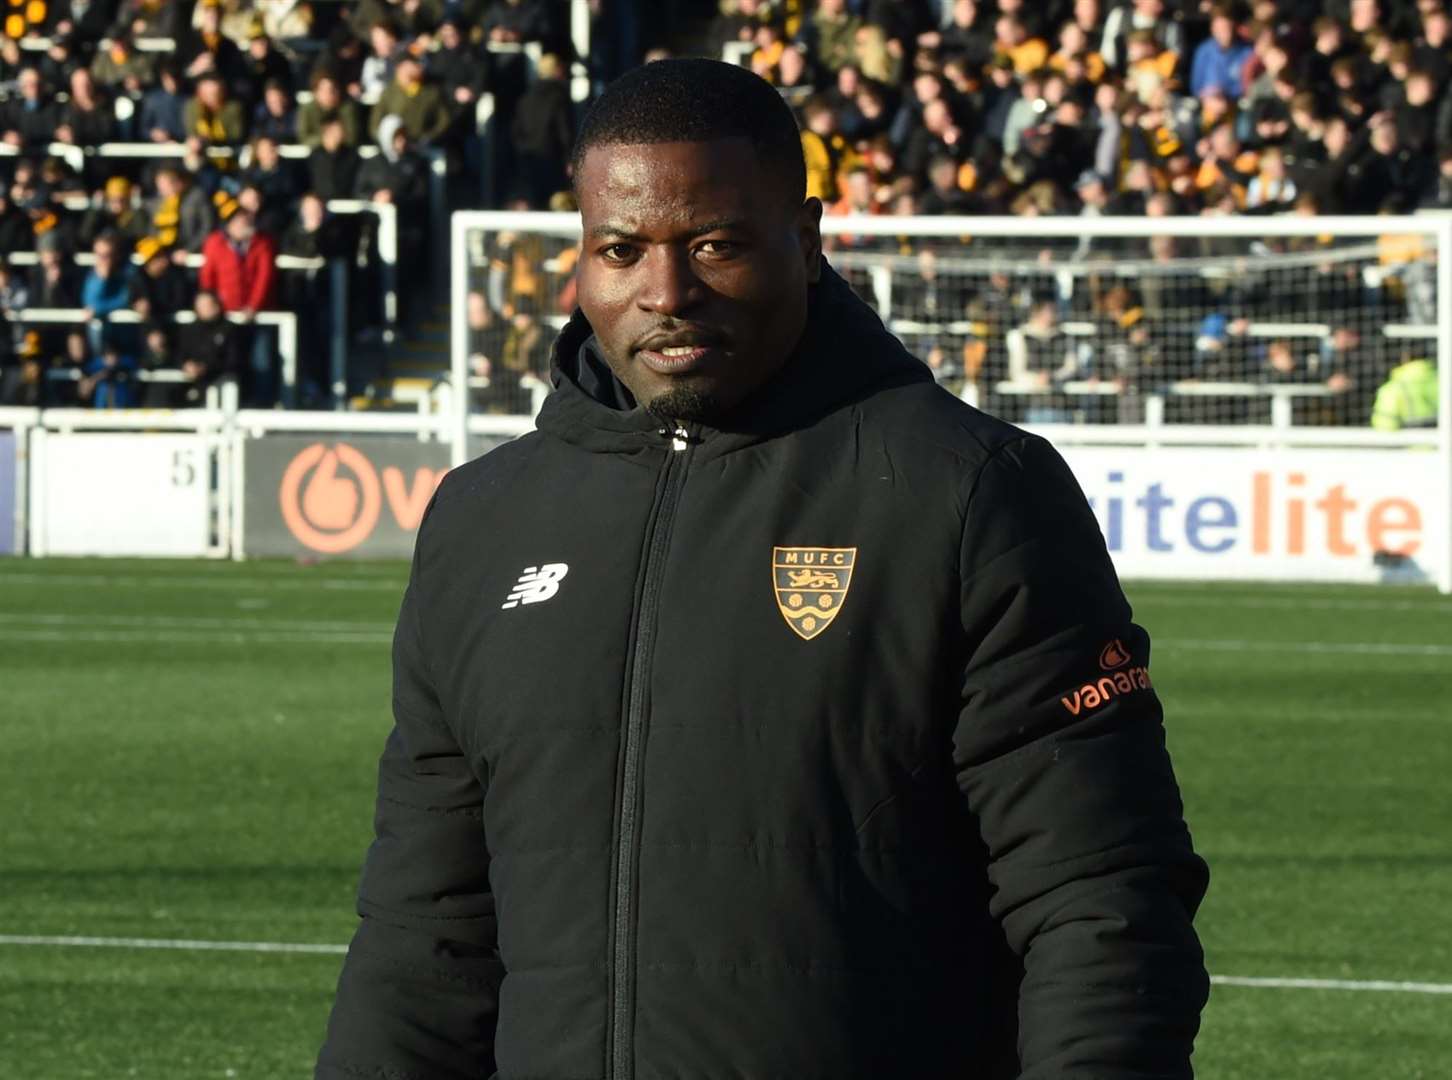 Manager George Elokobi hopes his Premier League experience counts as Stones rebuild for next season. Picture: Steve Terrell